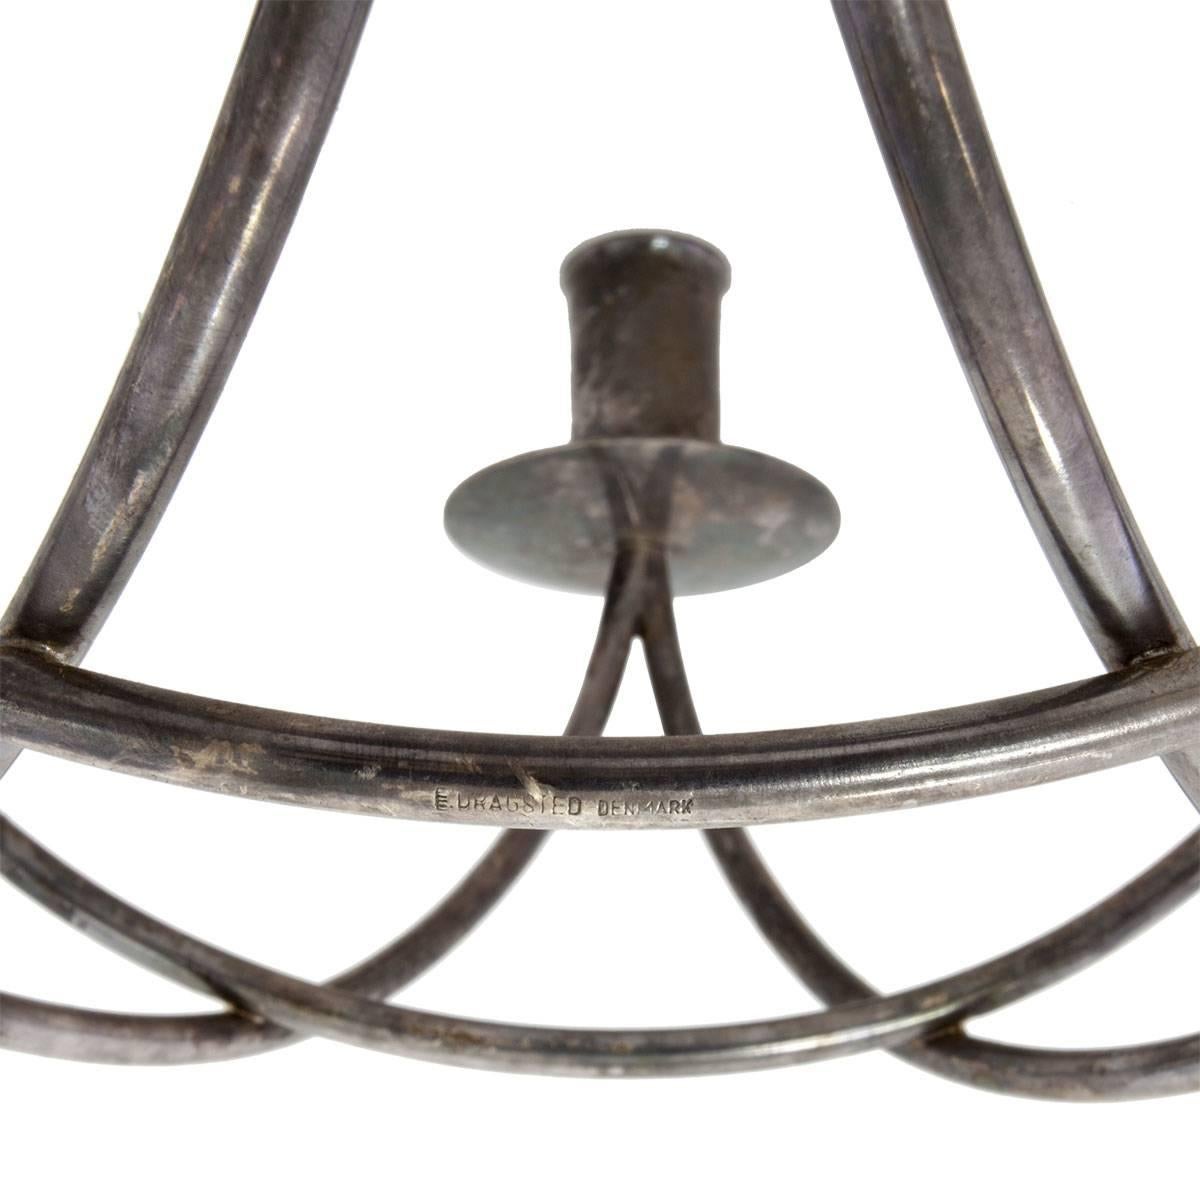 Danish mid century modern silverplated candelabrum sculpture. circa 1957 signed E. Dragsted Denmark. Dragsted goldsmiths, established in 1854, was purveyor to the danish royal family. the frame forms a six pointed (jewish star, star of David)
The